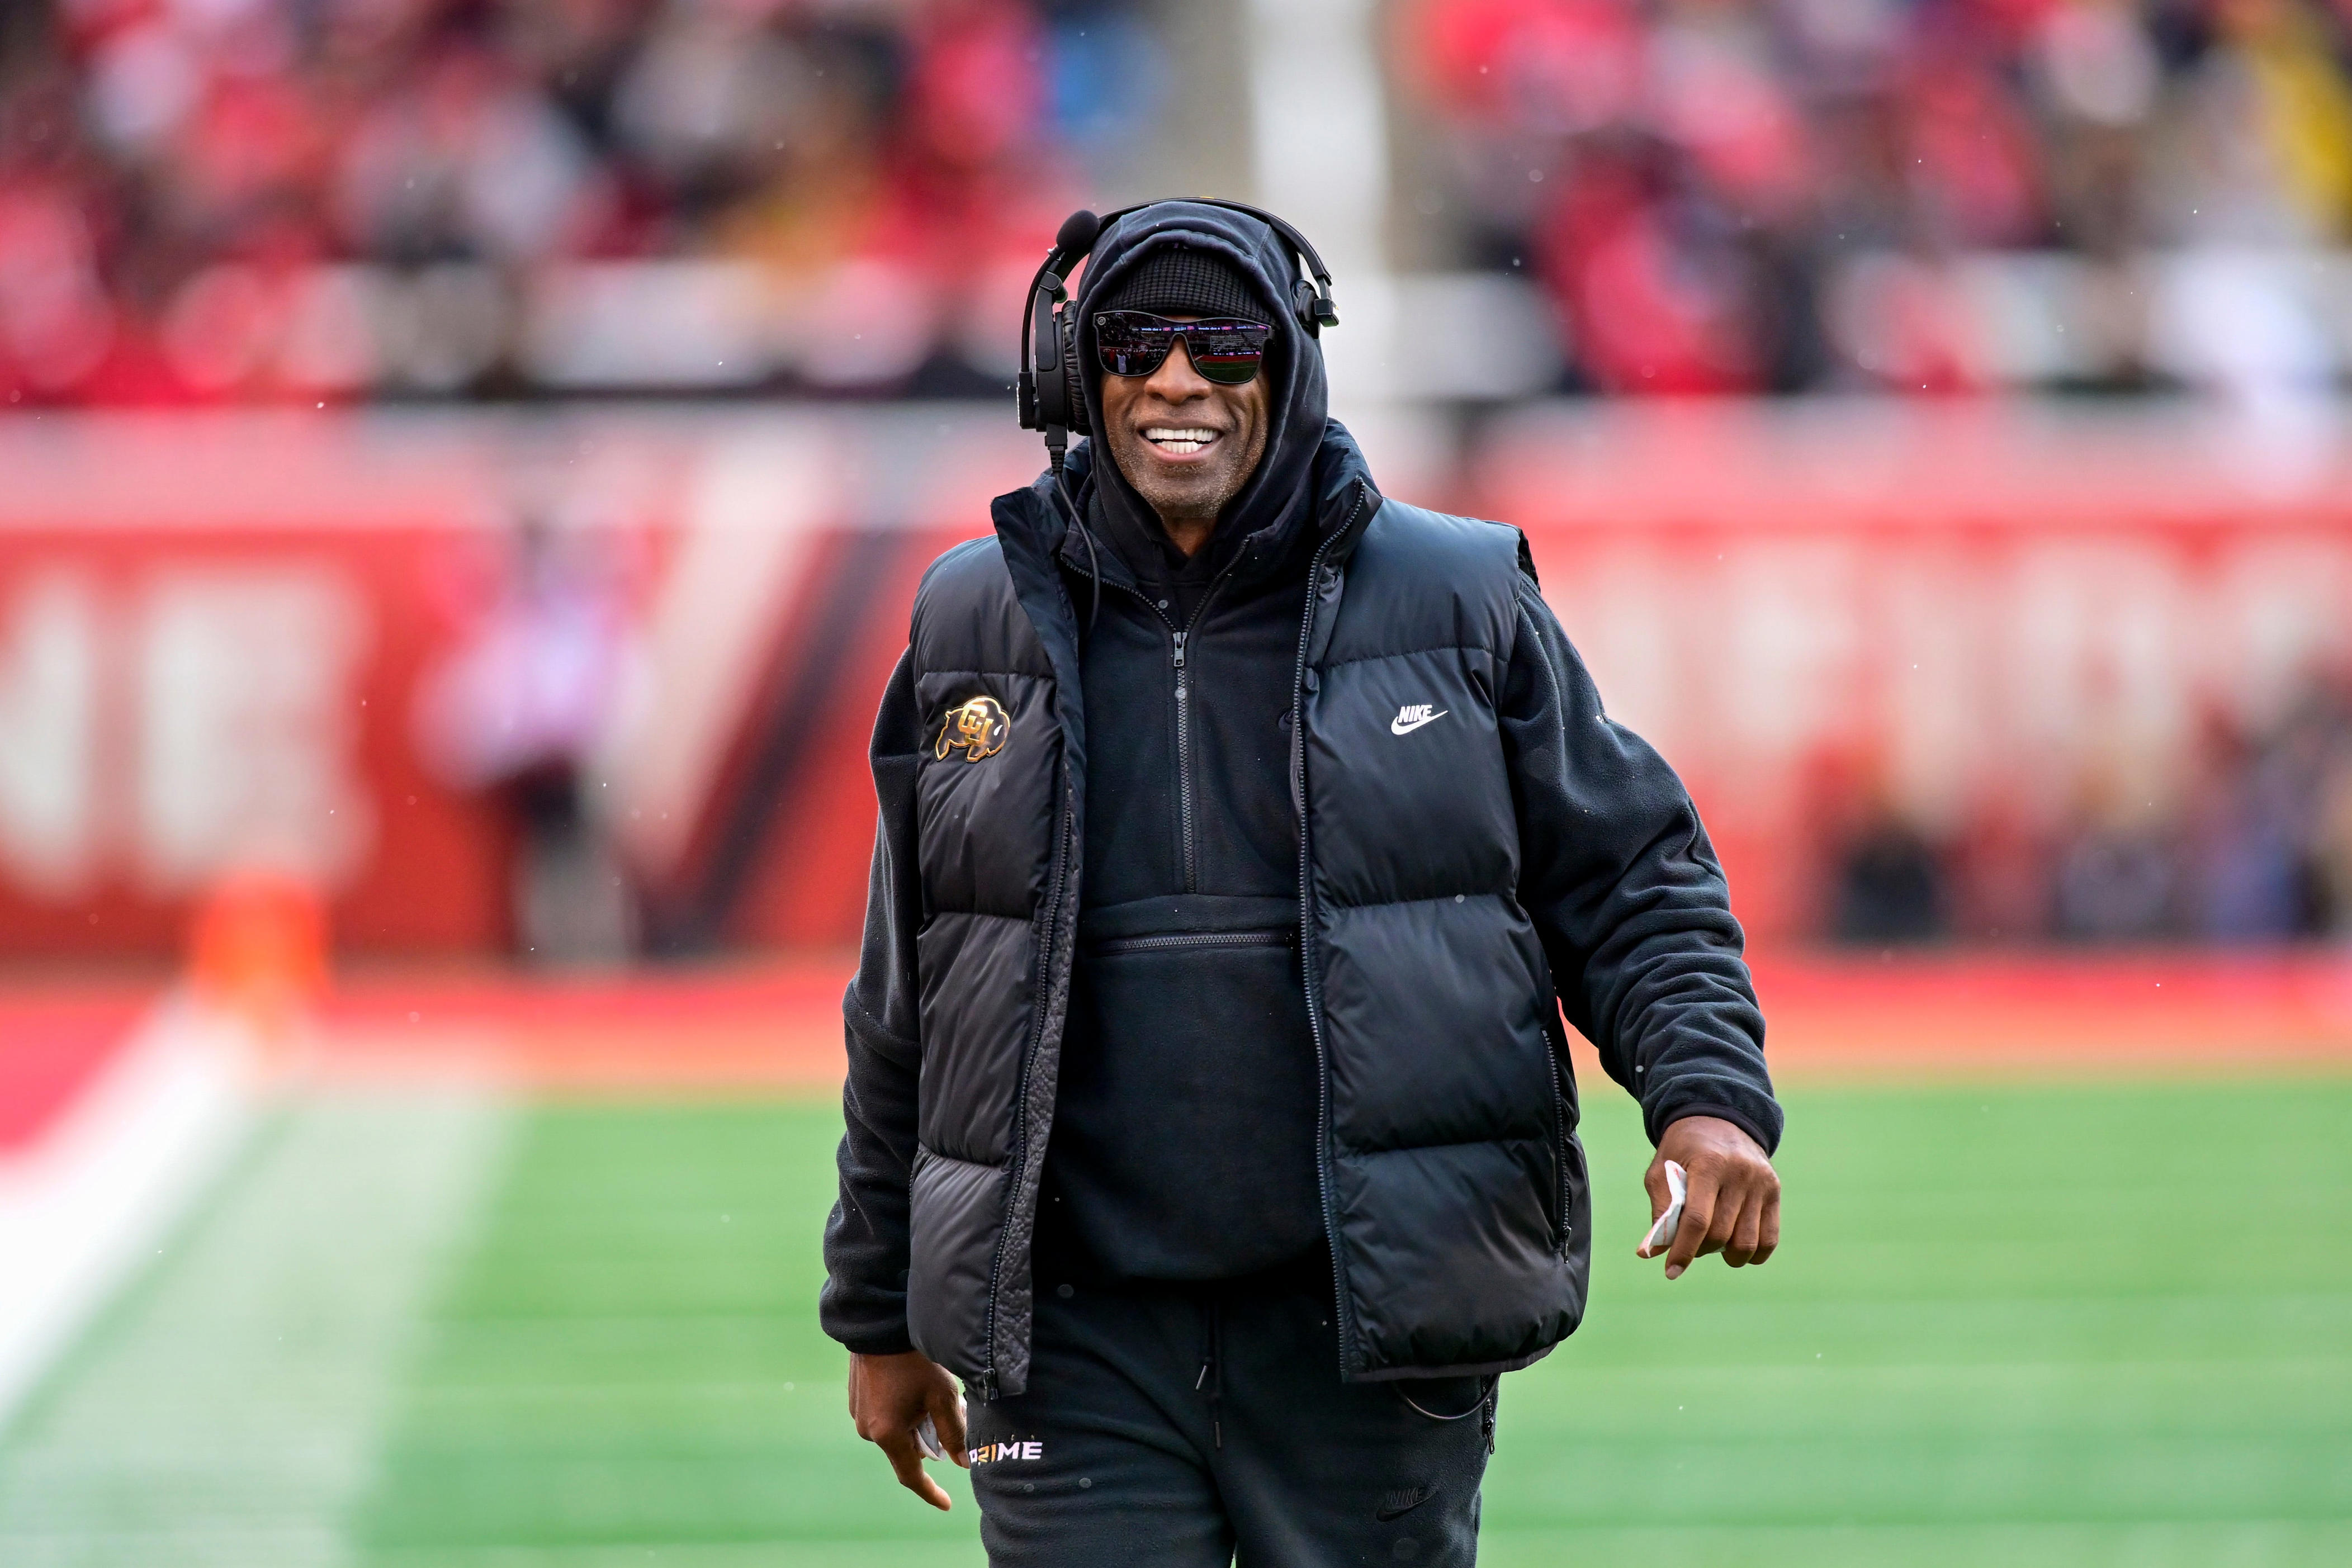 why deion sanders isn't discouraged by colorado's poor finish: 'we getting ready to start cookin'